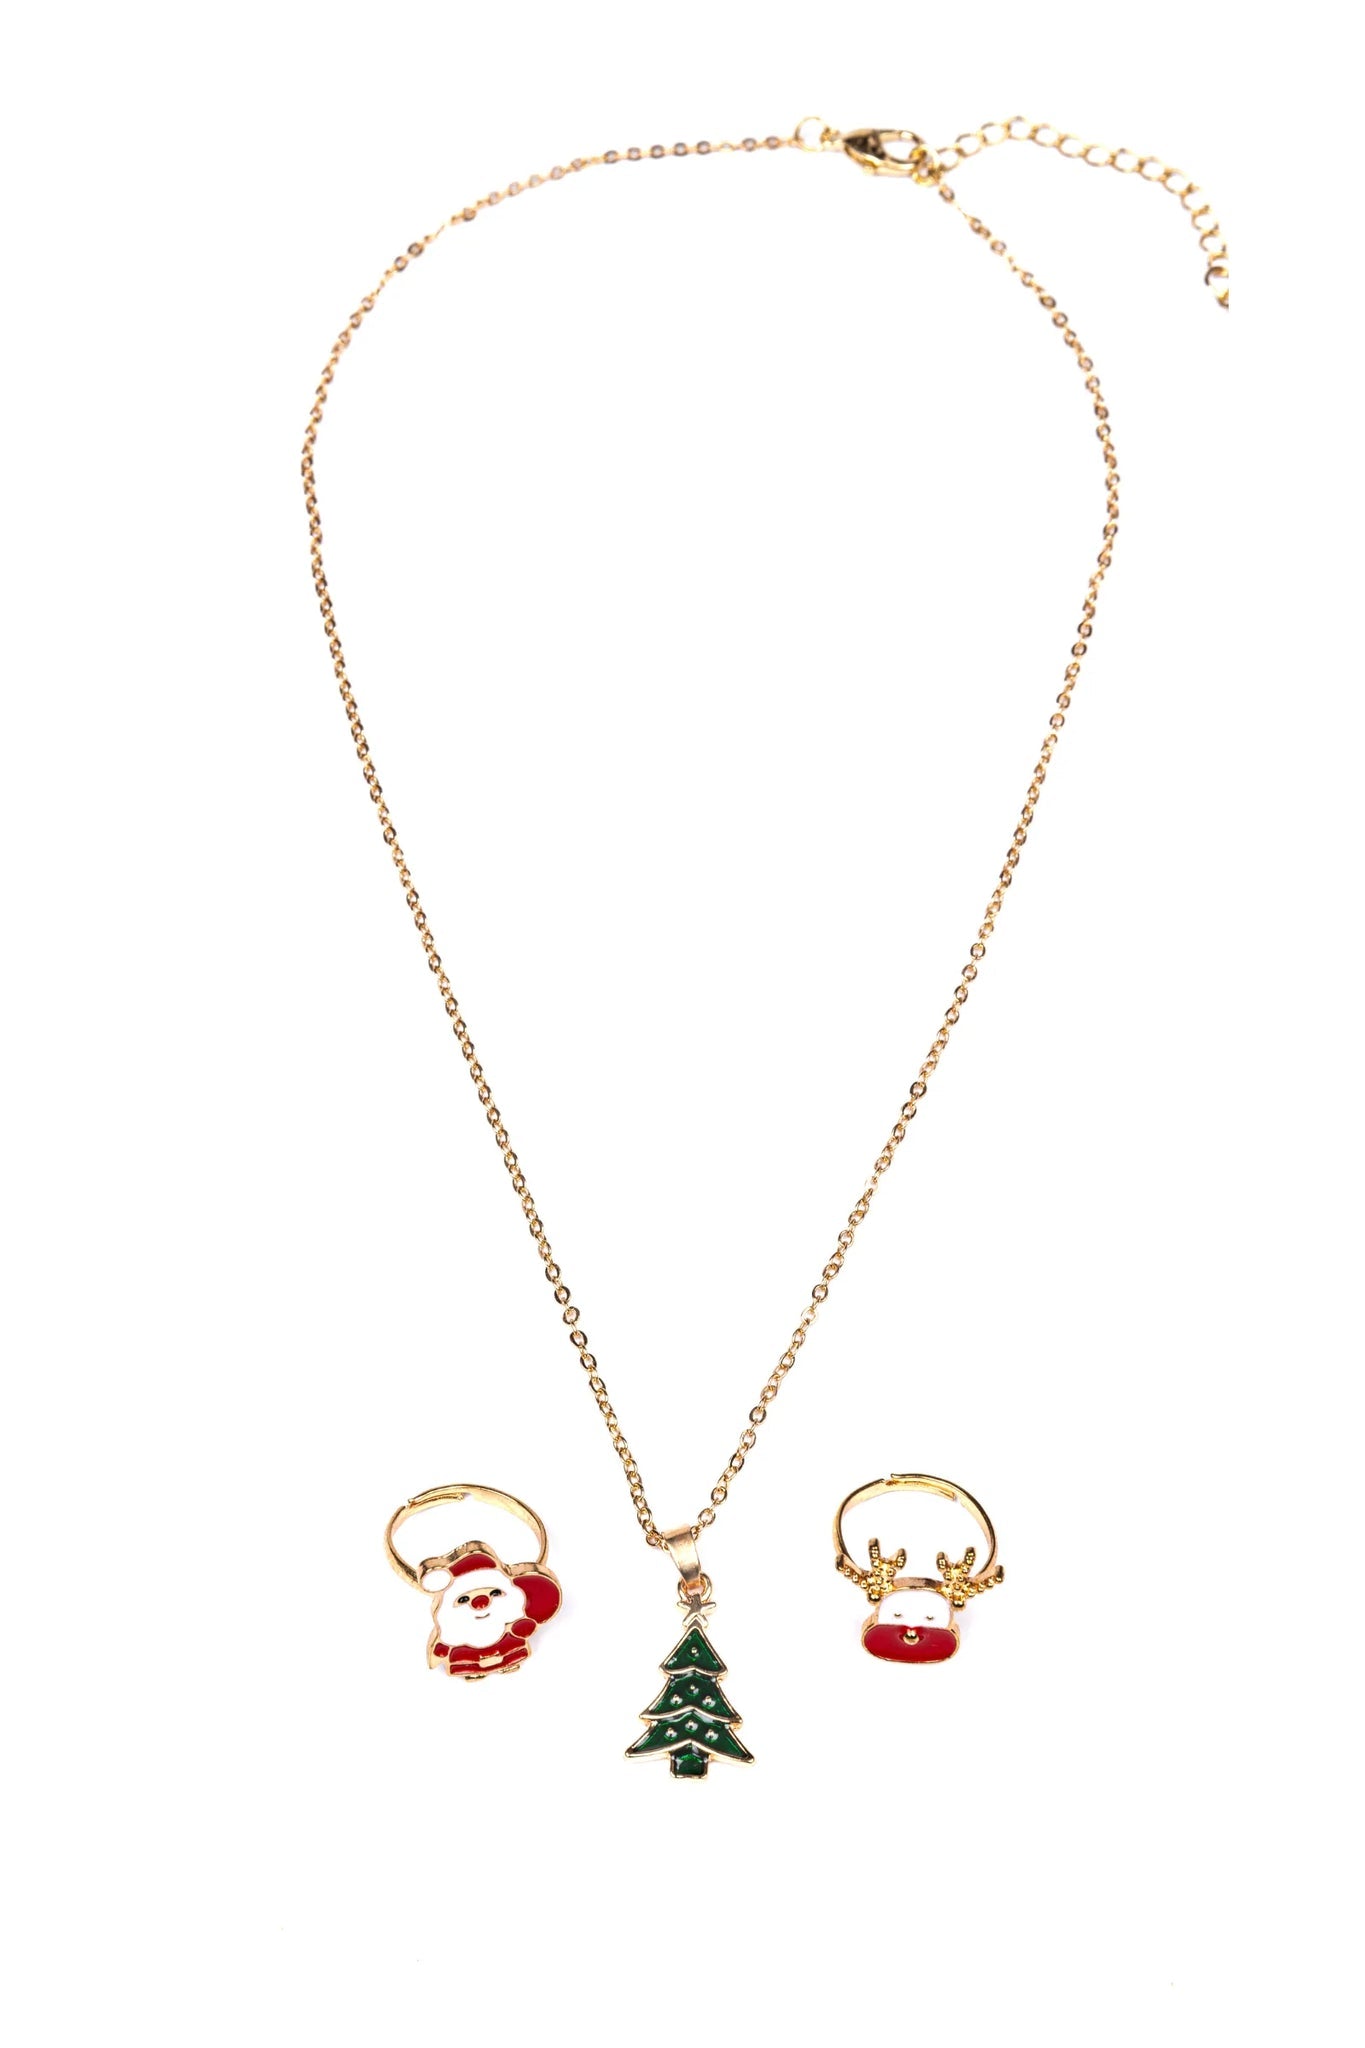 Girls Christmas Necklace & Ring